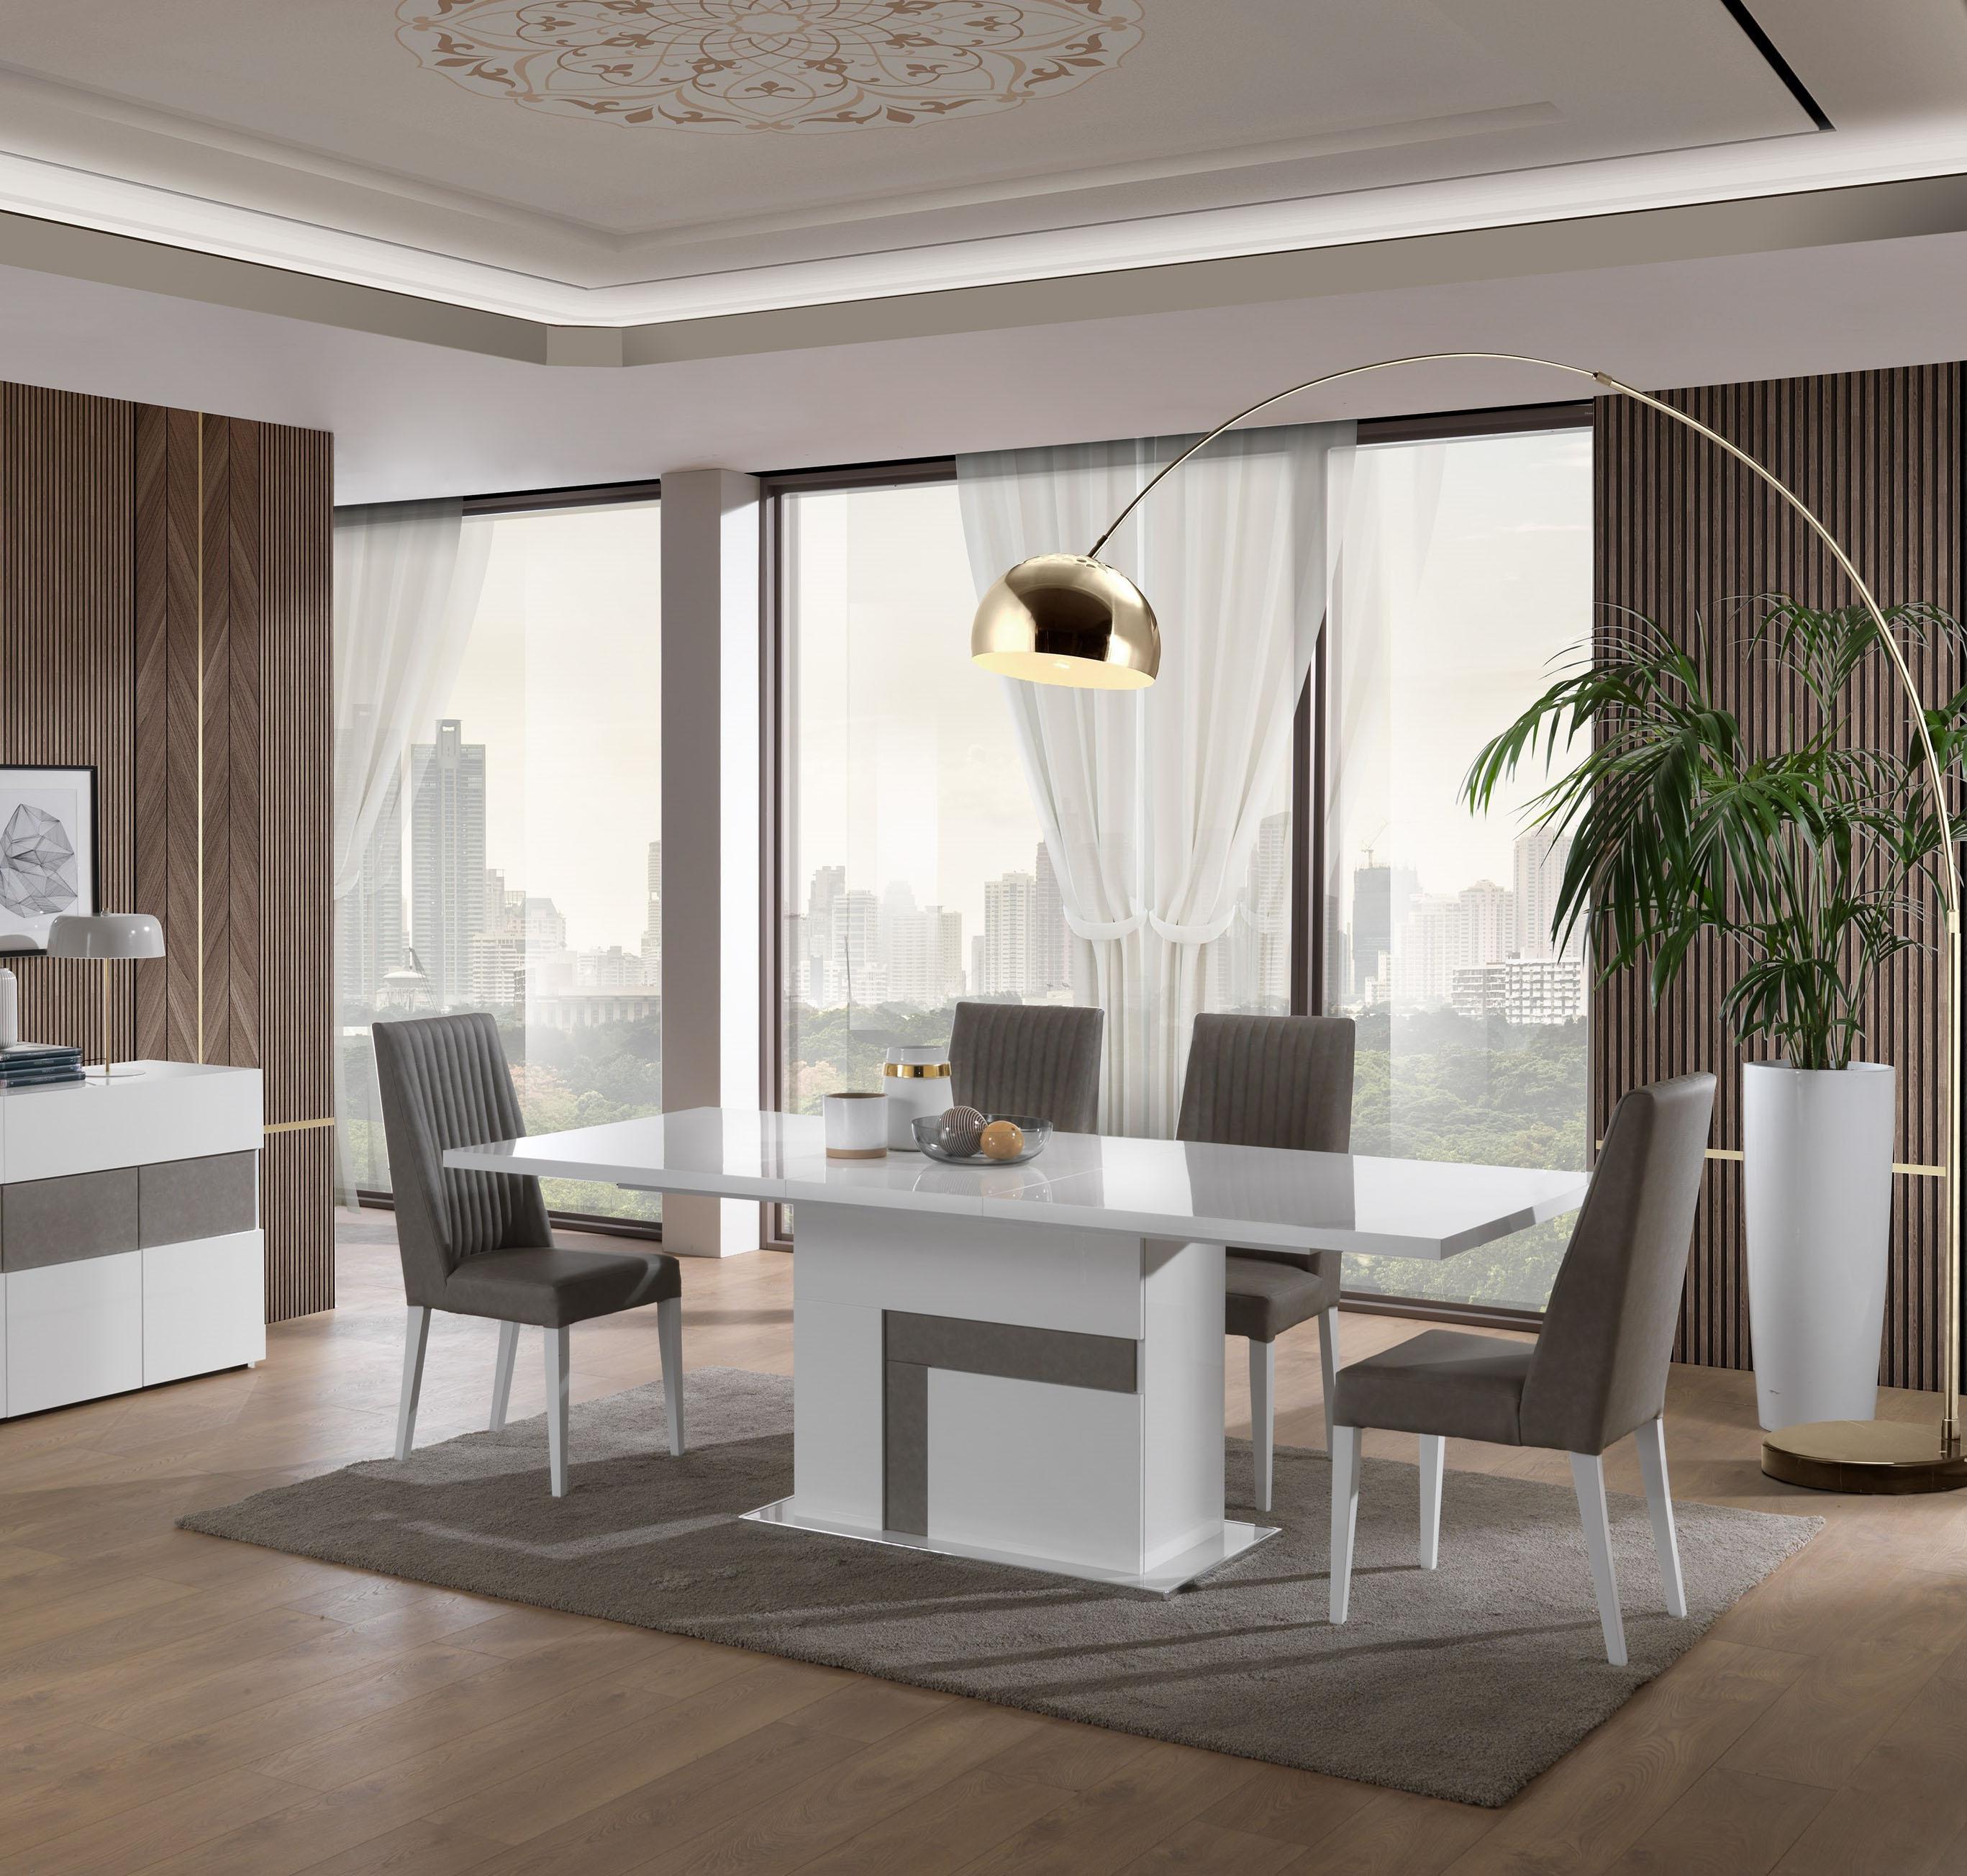 Contemporary, Modern Dining Set Luxuria SKU18122-7PC in White, Gray Eco Leather